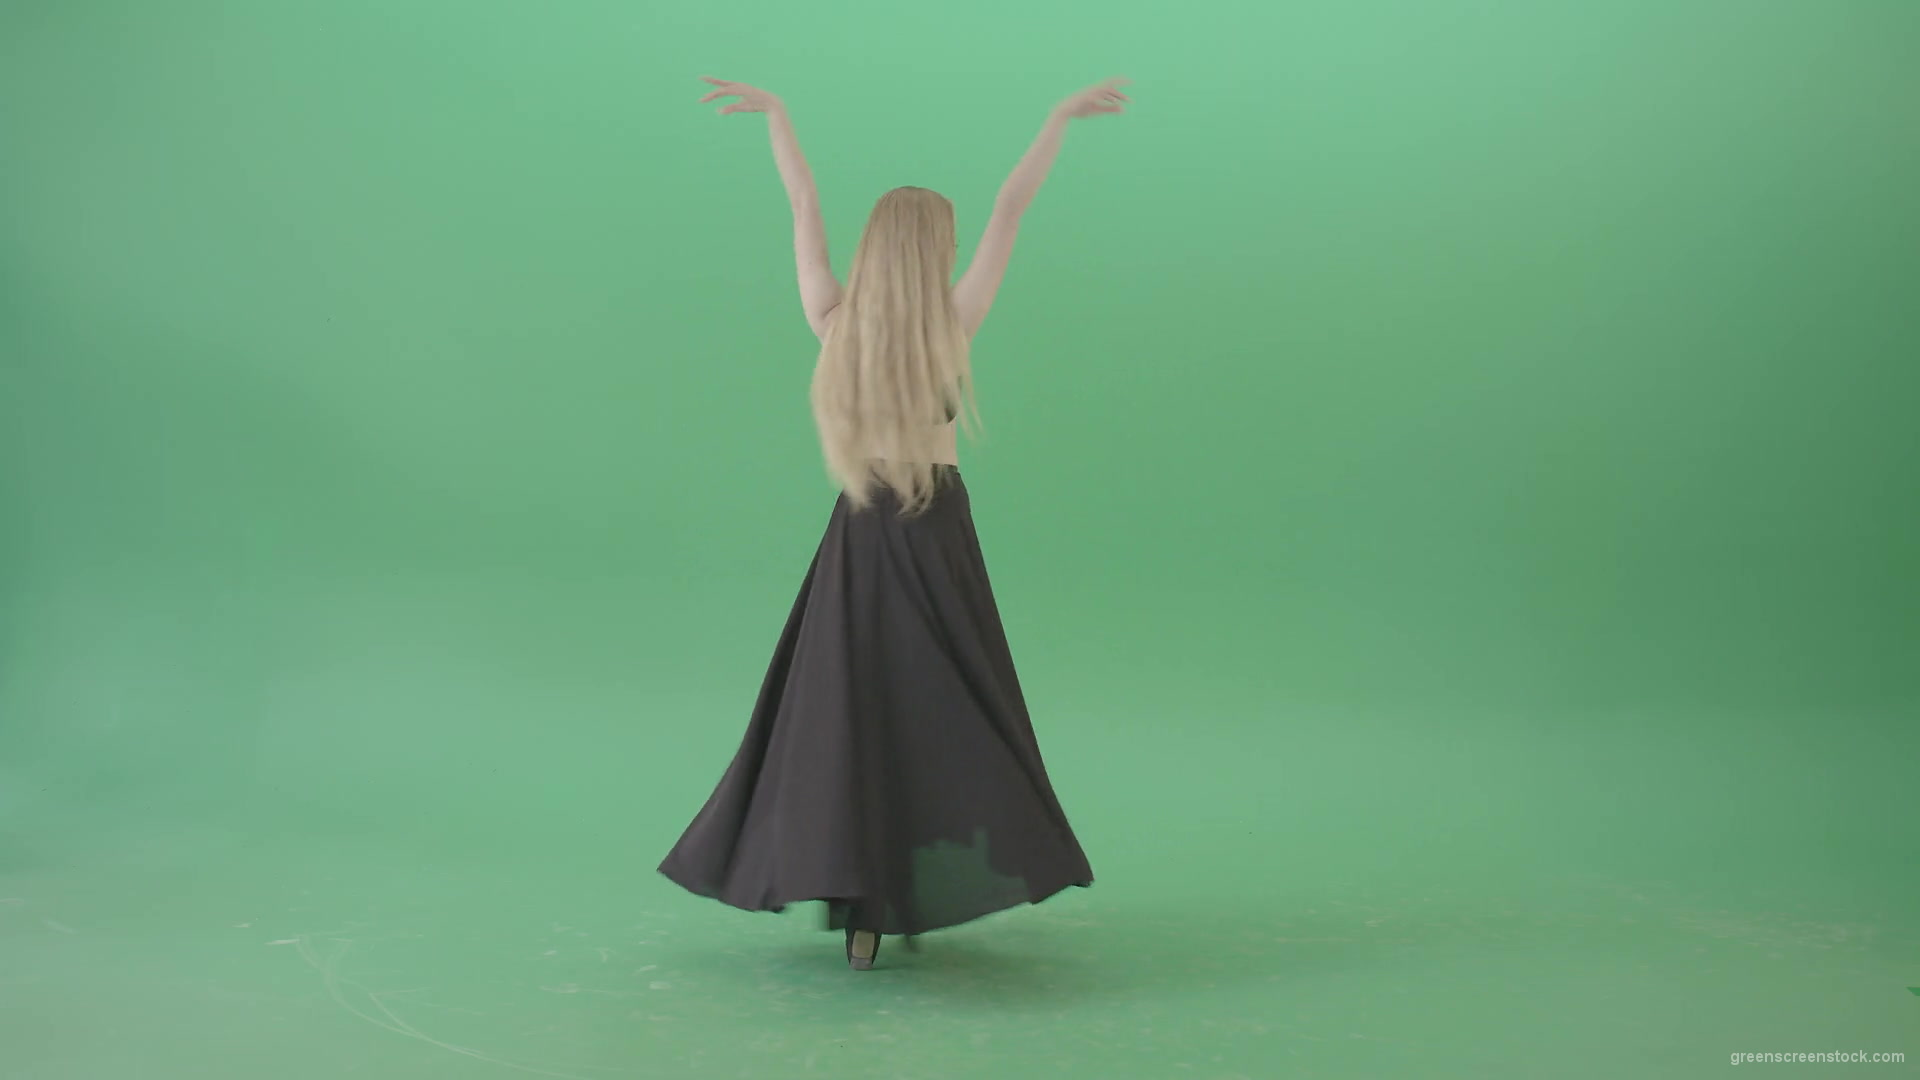 Dancing-in-the-shadow-spinning-on-the-green-screen-ballet-art-by-dancing-girl-4K-Video-Footage-1920_004 Green Screen Stock